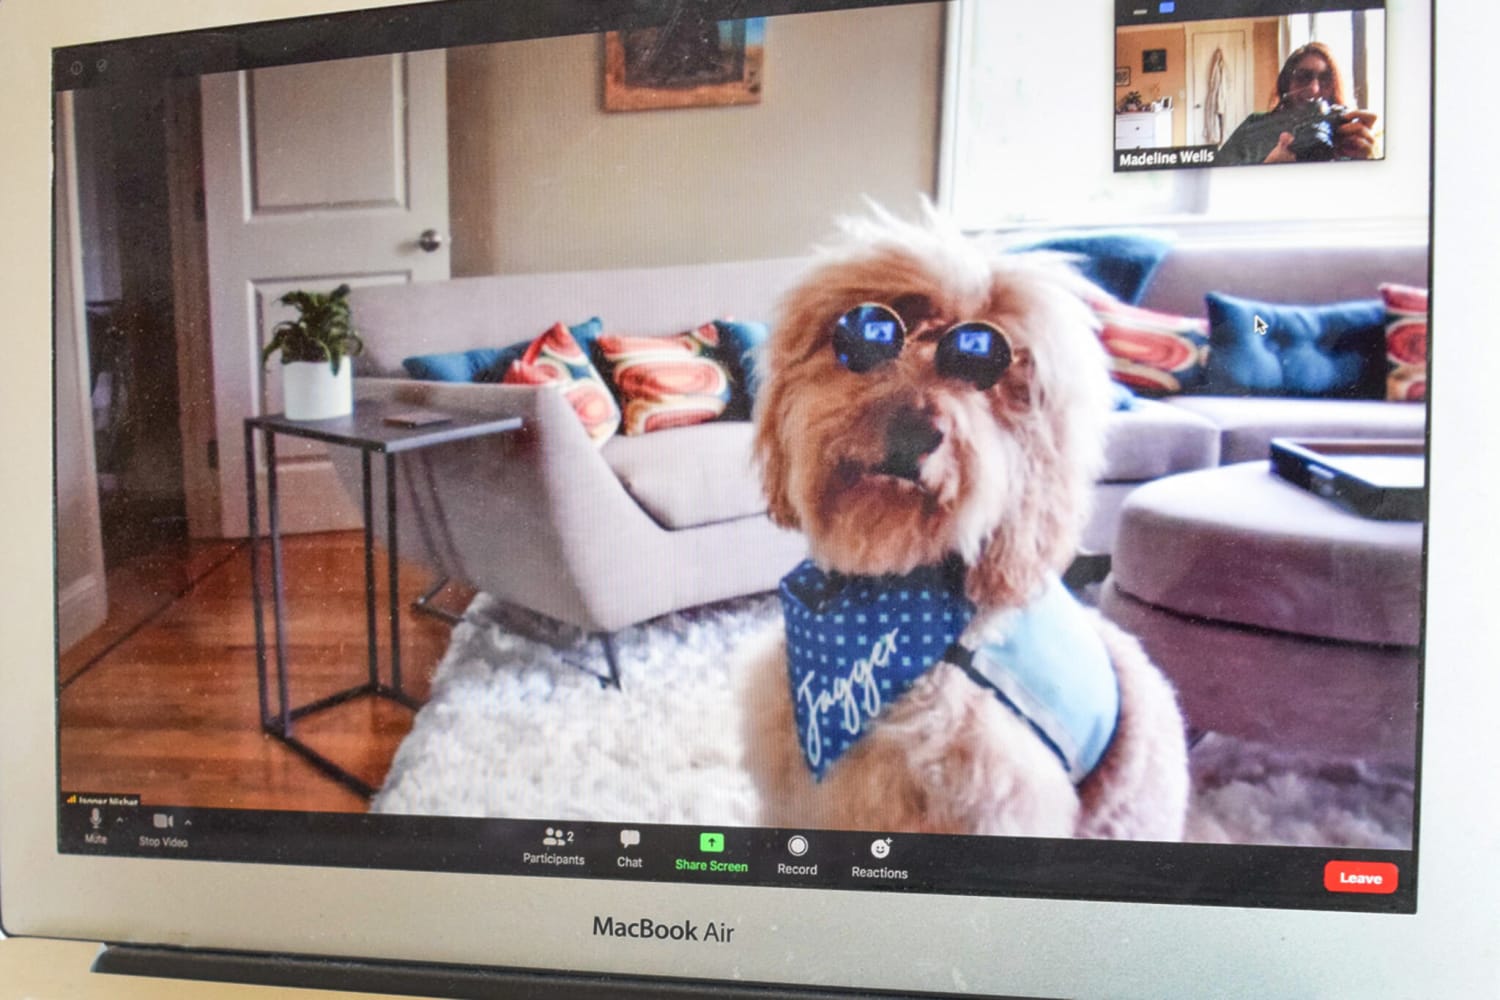 I tried a virtual visit with a therapy dog. It was adorable.